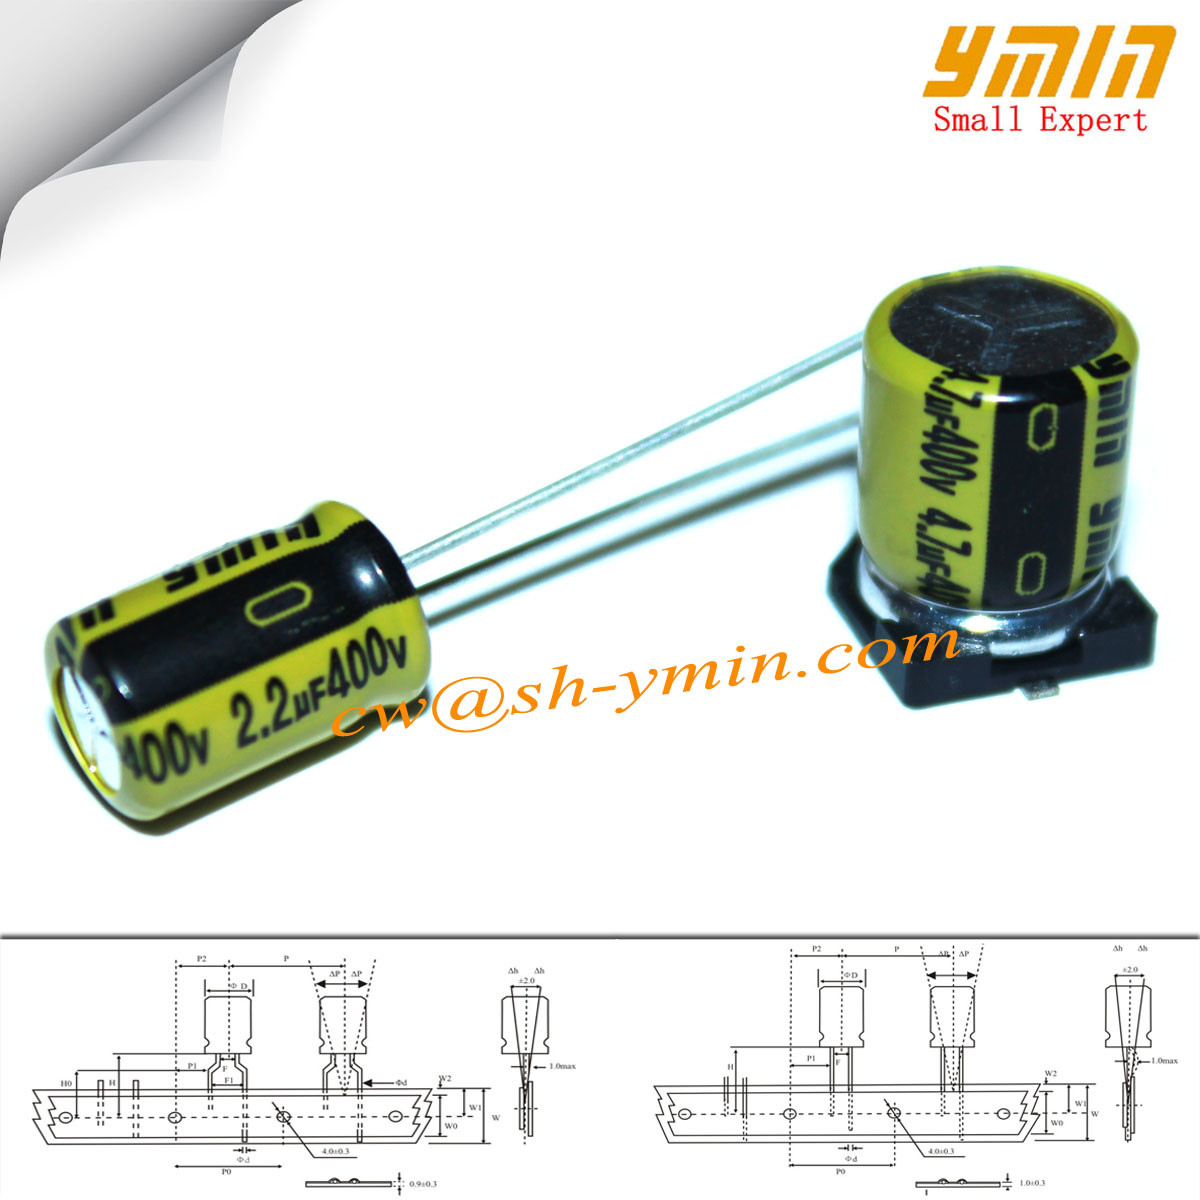  2.2uF 400V 6.3x9mm Capacitor LKM Series 105°C 7,000 ~ 10,000 Hours Radial Aluminum Electrolytic Capacitor RoHS Compliant Manufactures